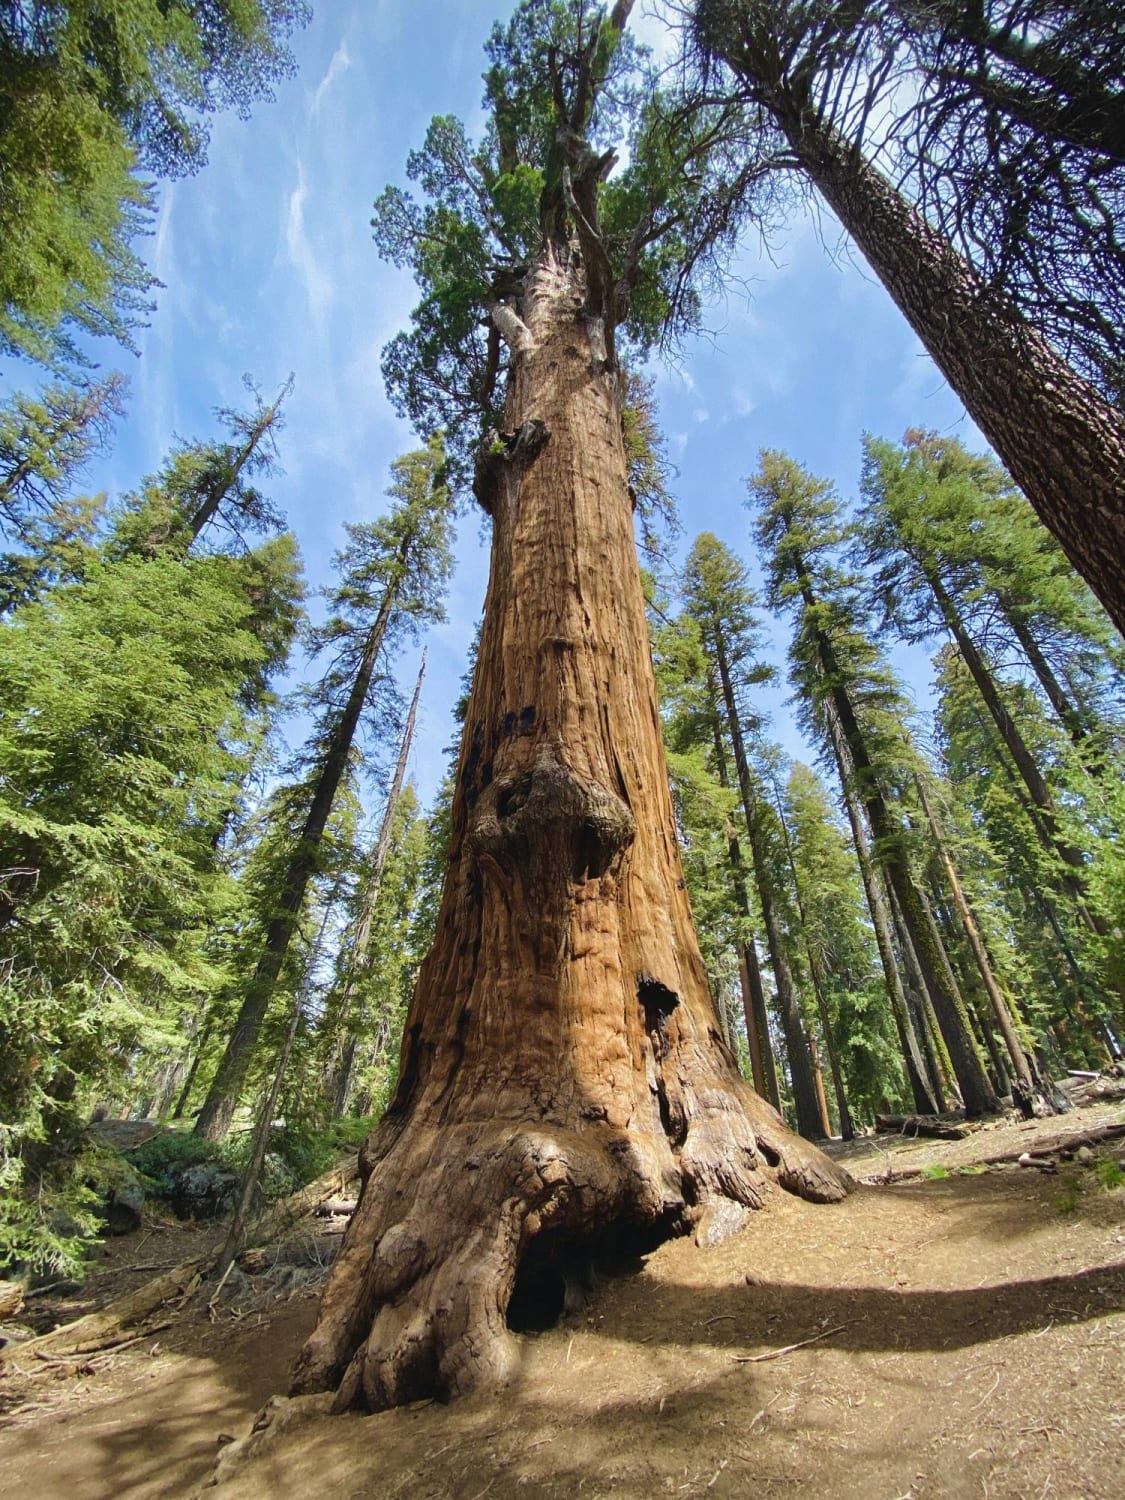 Largest trees on earth, Sequoia National Park